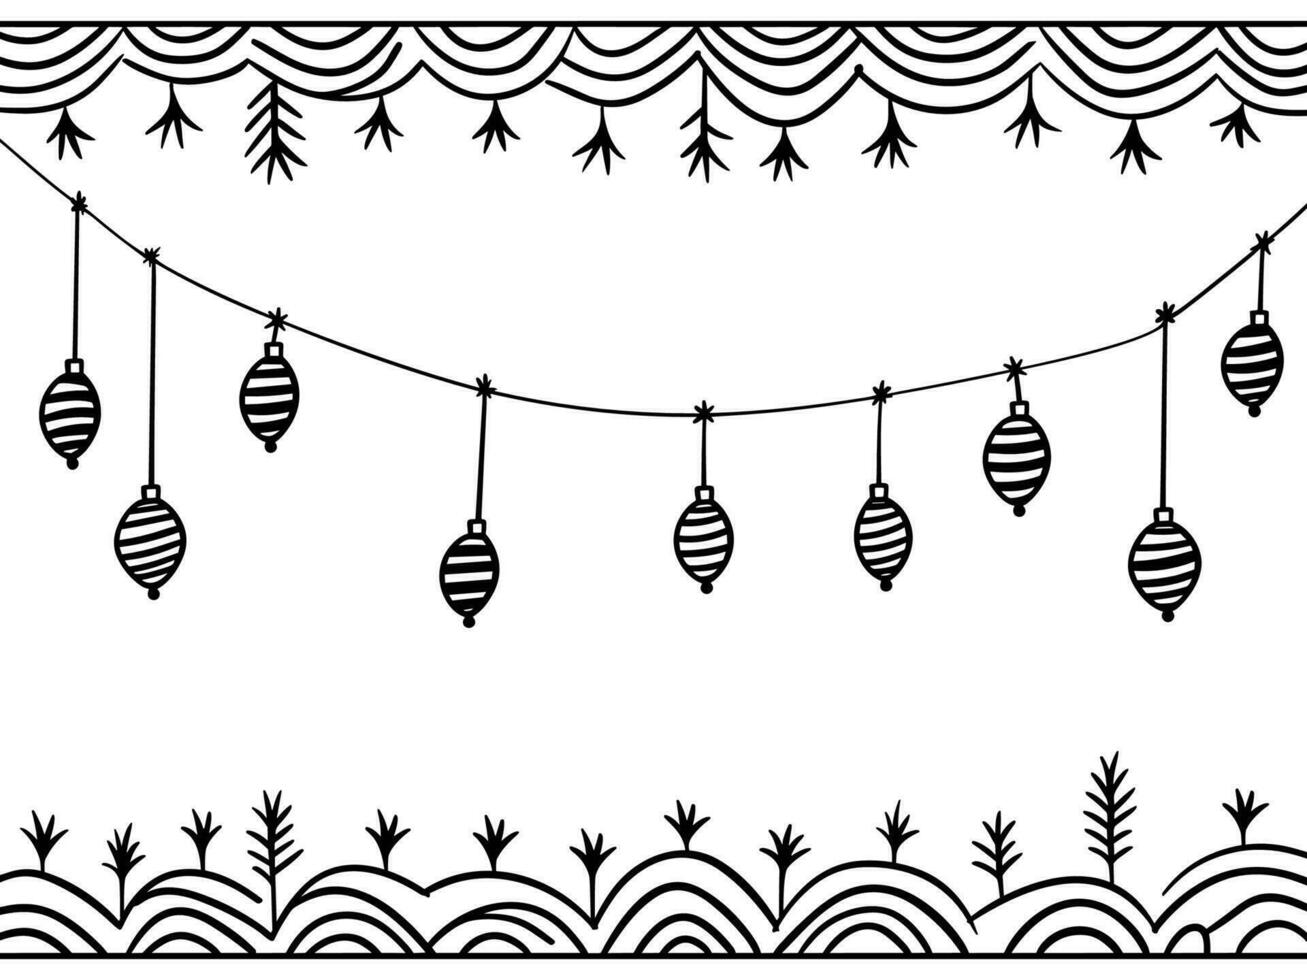 Christmas pattern with fir branches and toys. Sketched holiday garlands and decorations isolated on white background. Hand drawn vector illustration